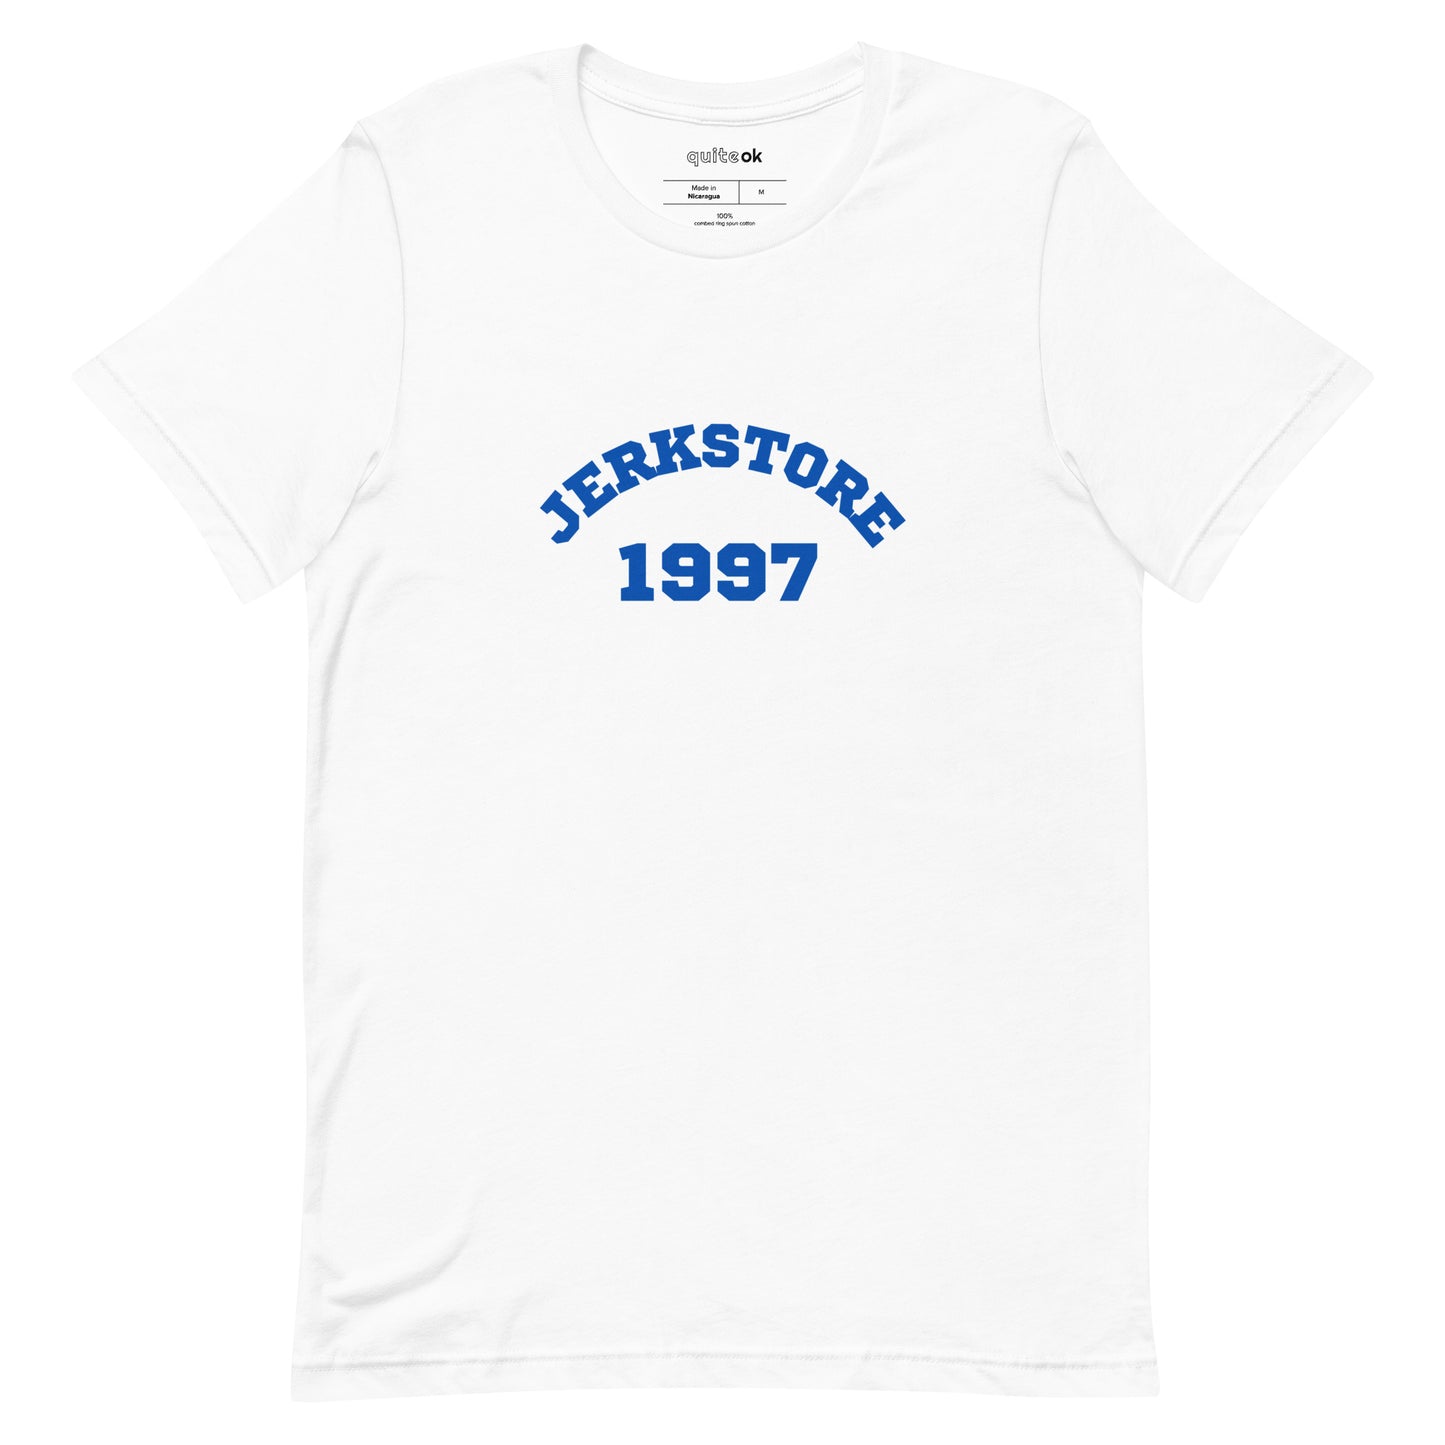 Jerk Store Comedy Quote T-Shirt